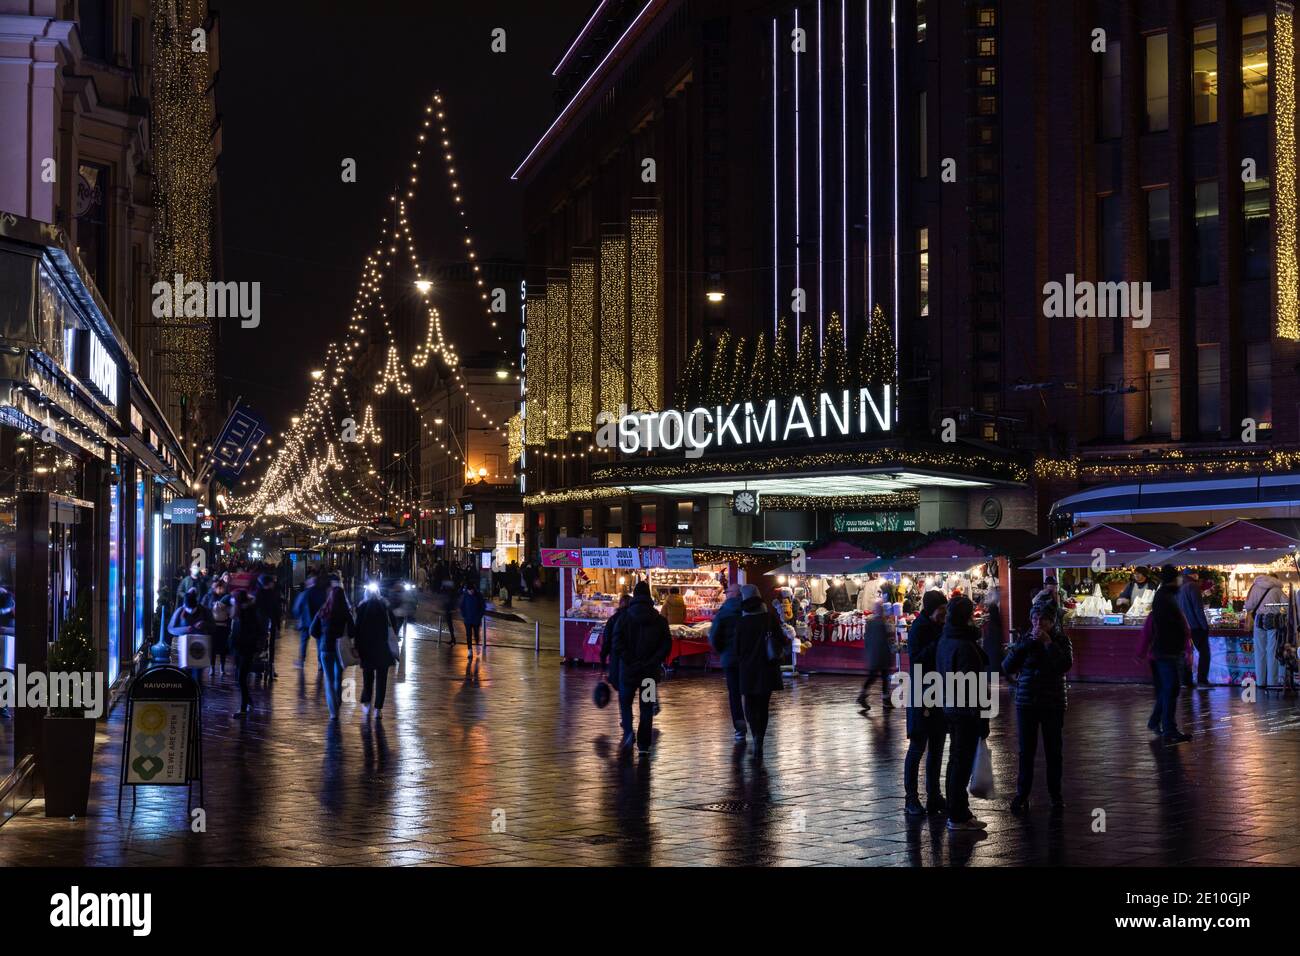 People on Aleksanterinkatu with Christmas lights, Stockmann department store main entrance and some Christmas stalls in Helsinki, Finland Stock Photo